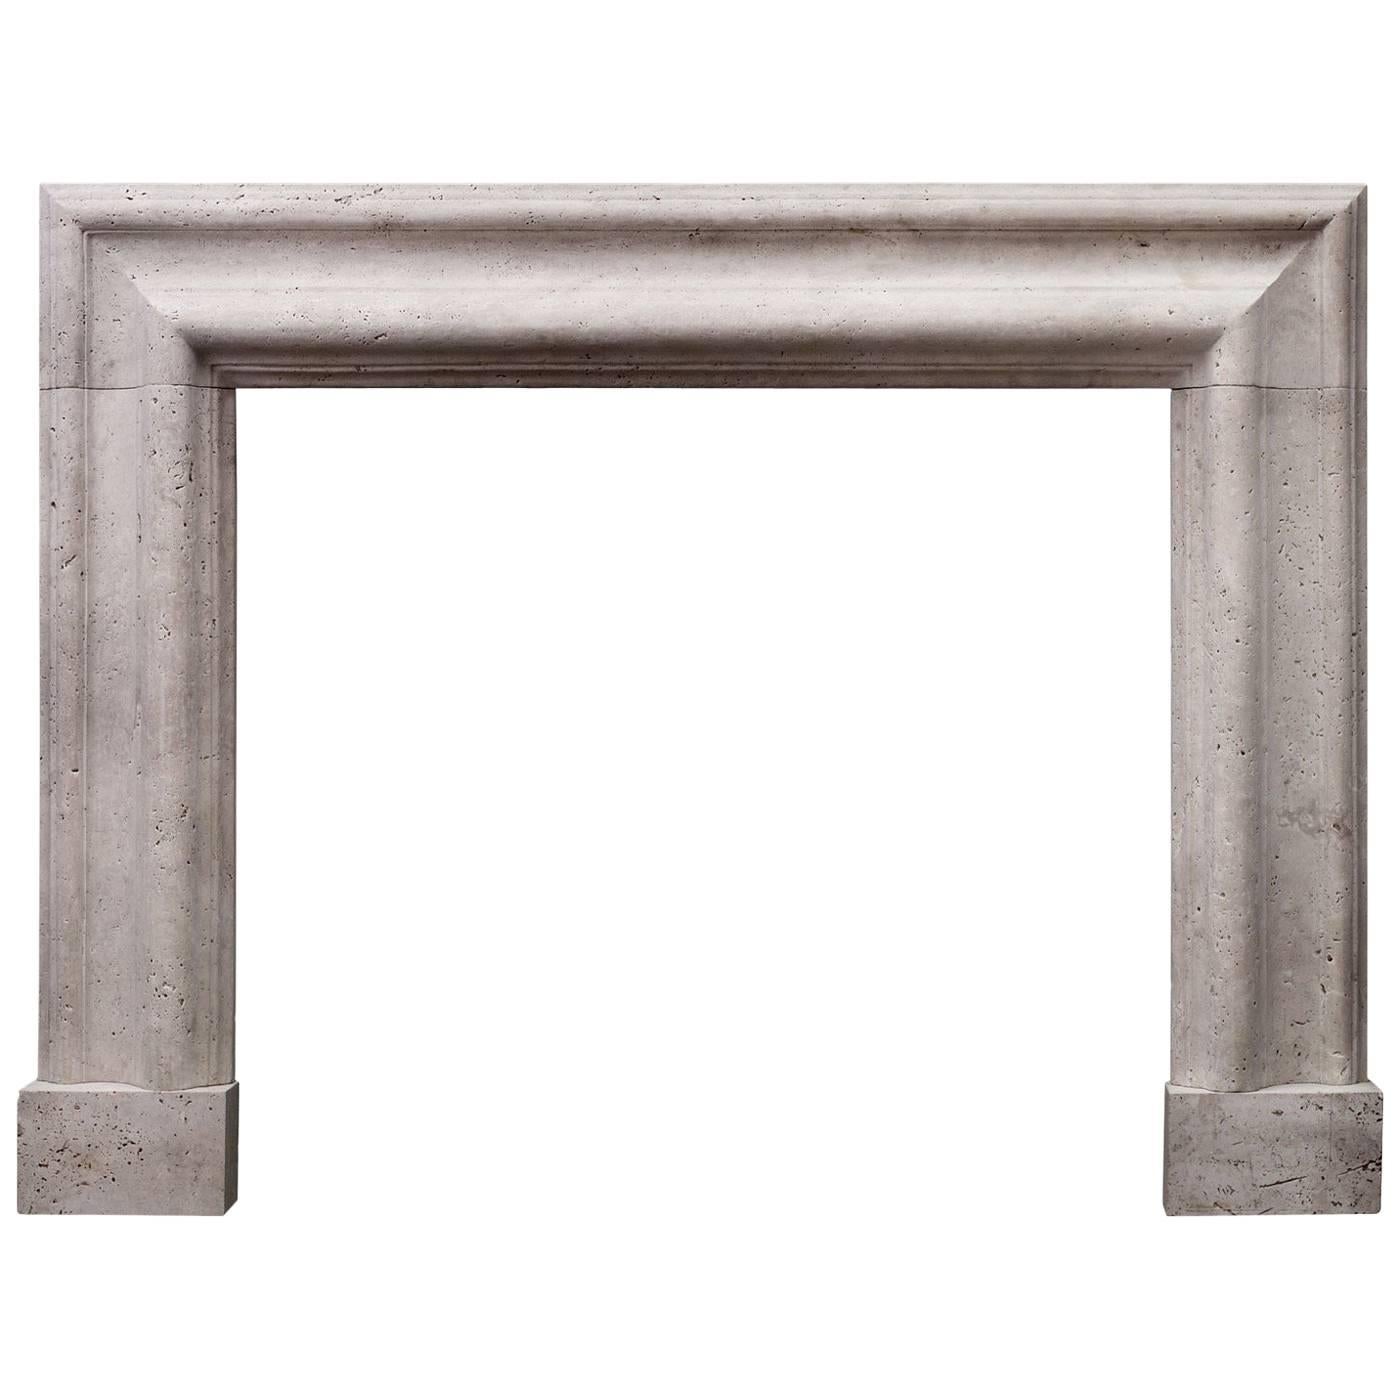 Large English Moulded Bolection Fireplace in White Travertine For Sale